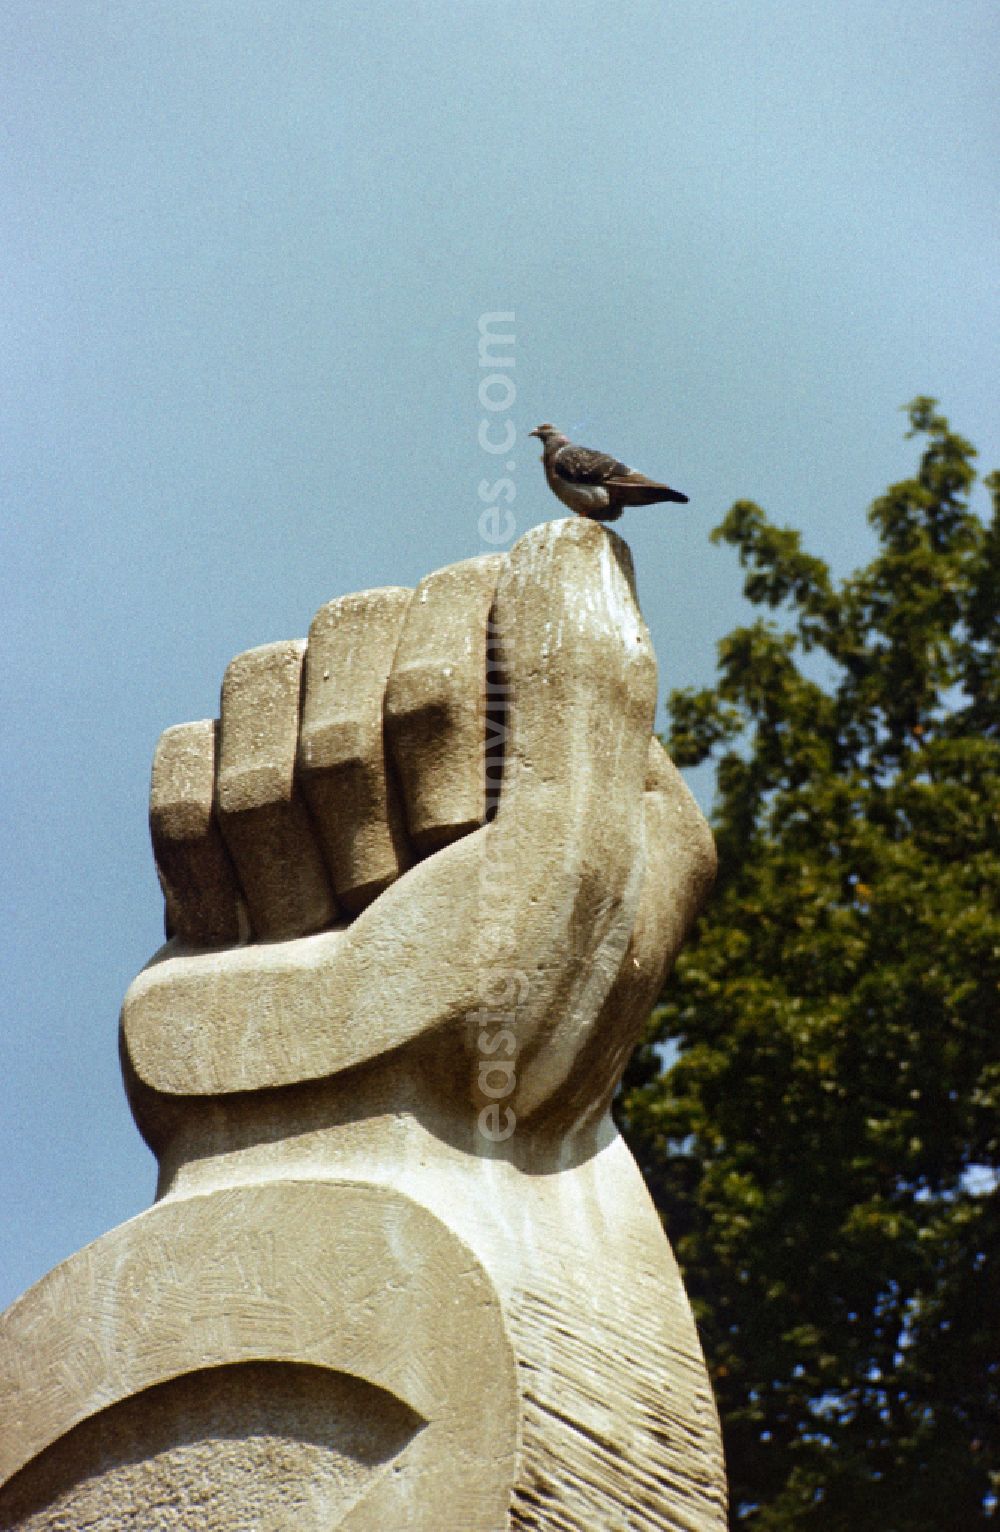 GDR picture archive: Berlin - Clenched fist by sculptor Fritz Cremer at Alexanderplatz in Berlin-Mitte on the territory of the former GDR, German Democratic Republic